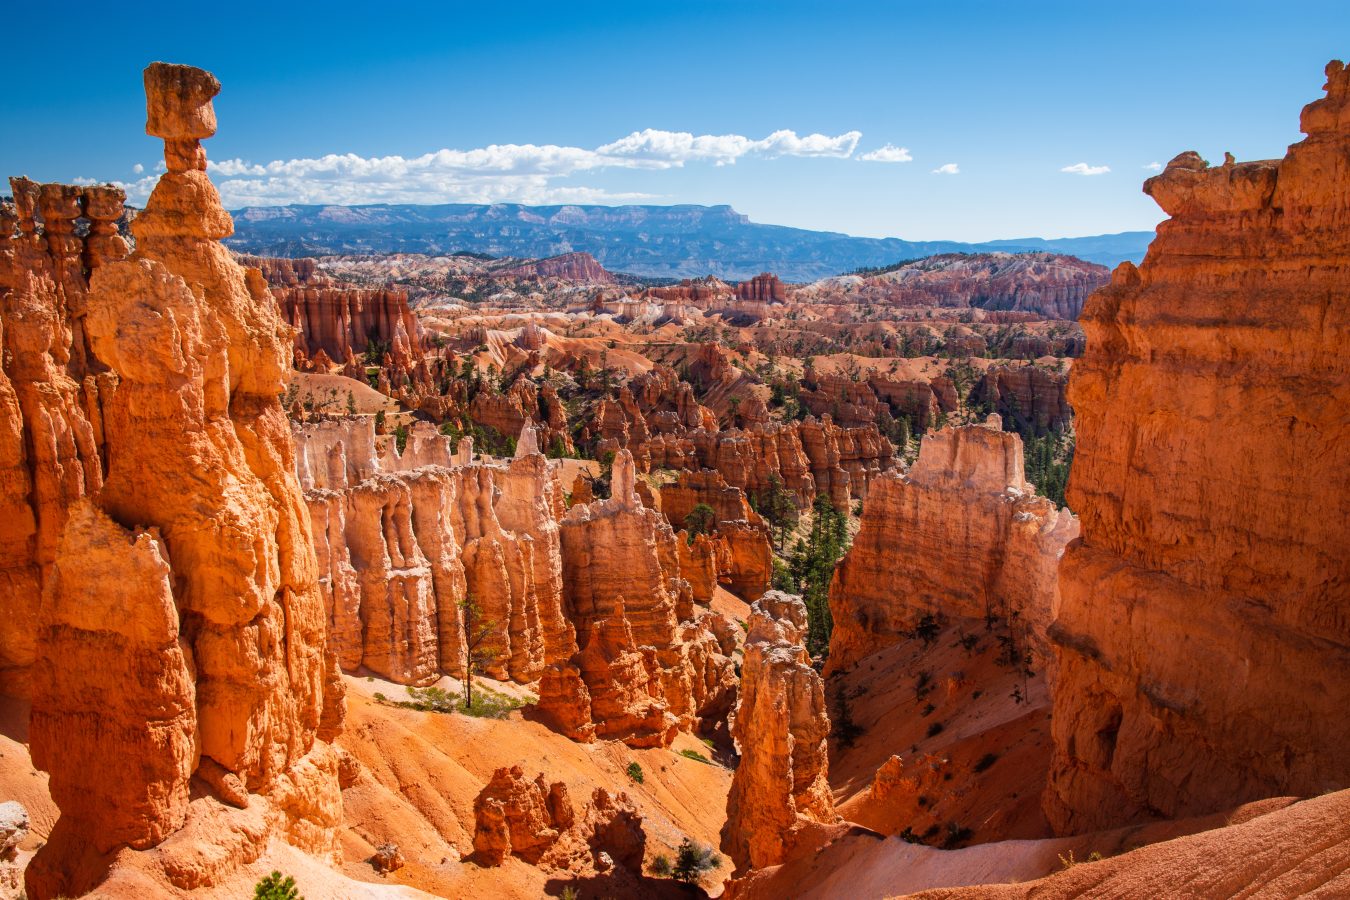 Overlooking Bryce Canyon National Park.